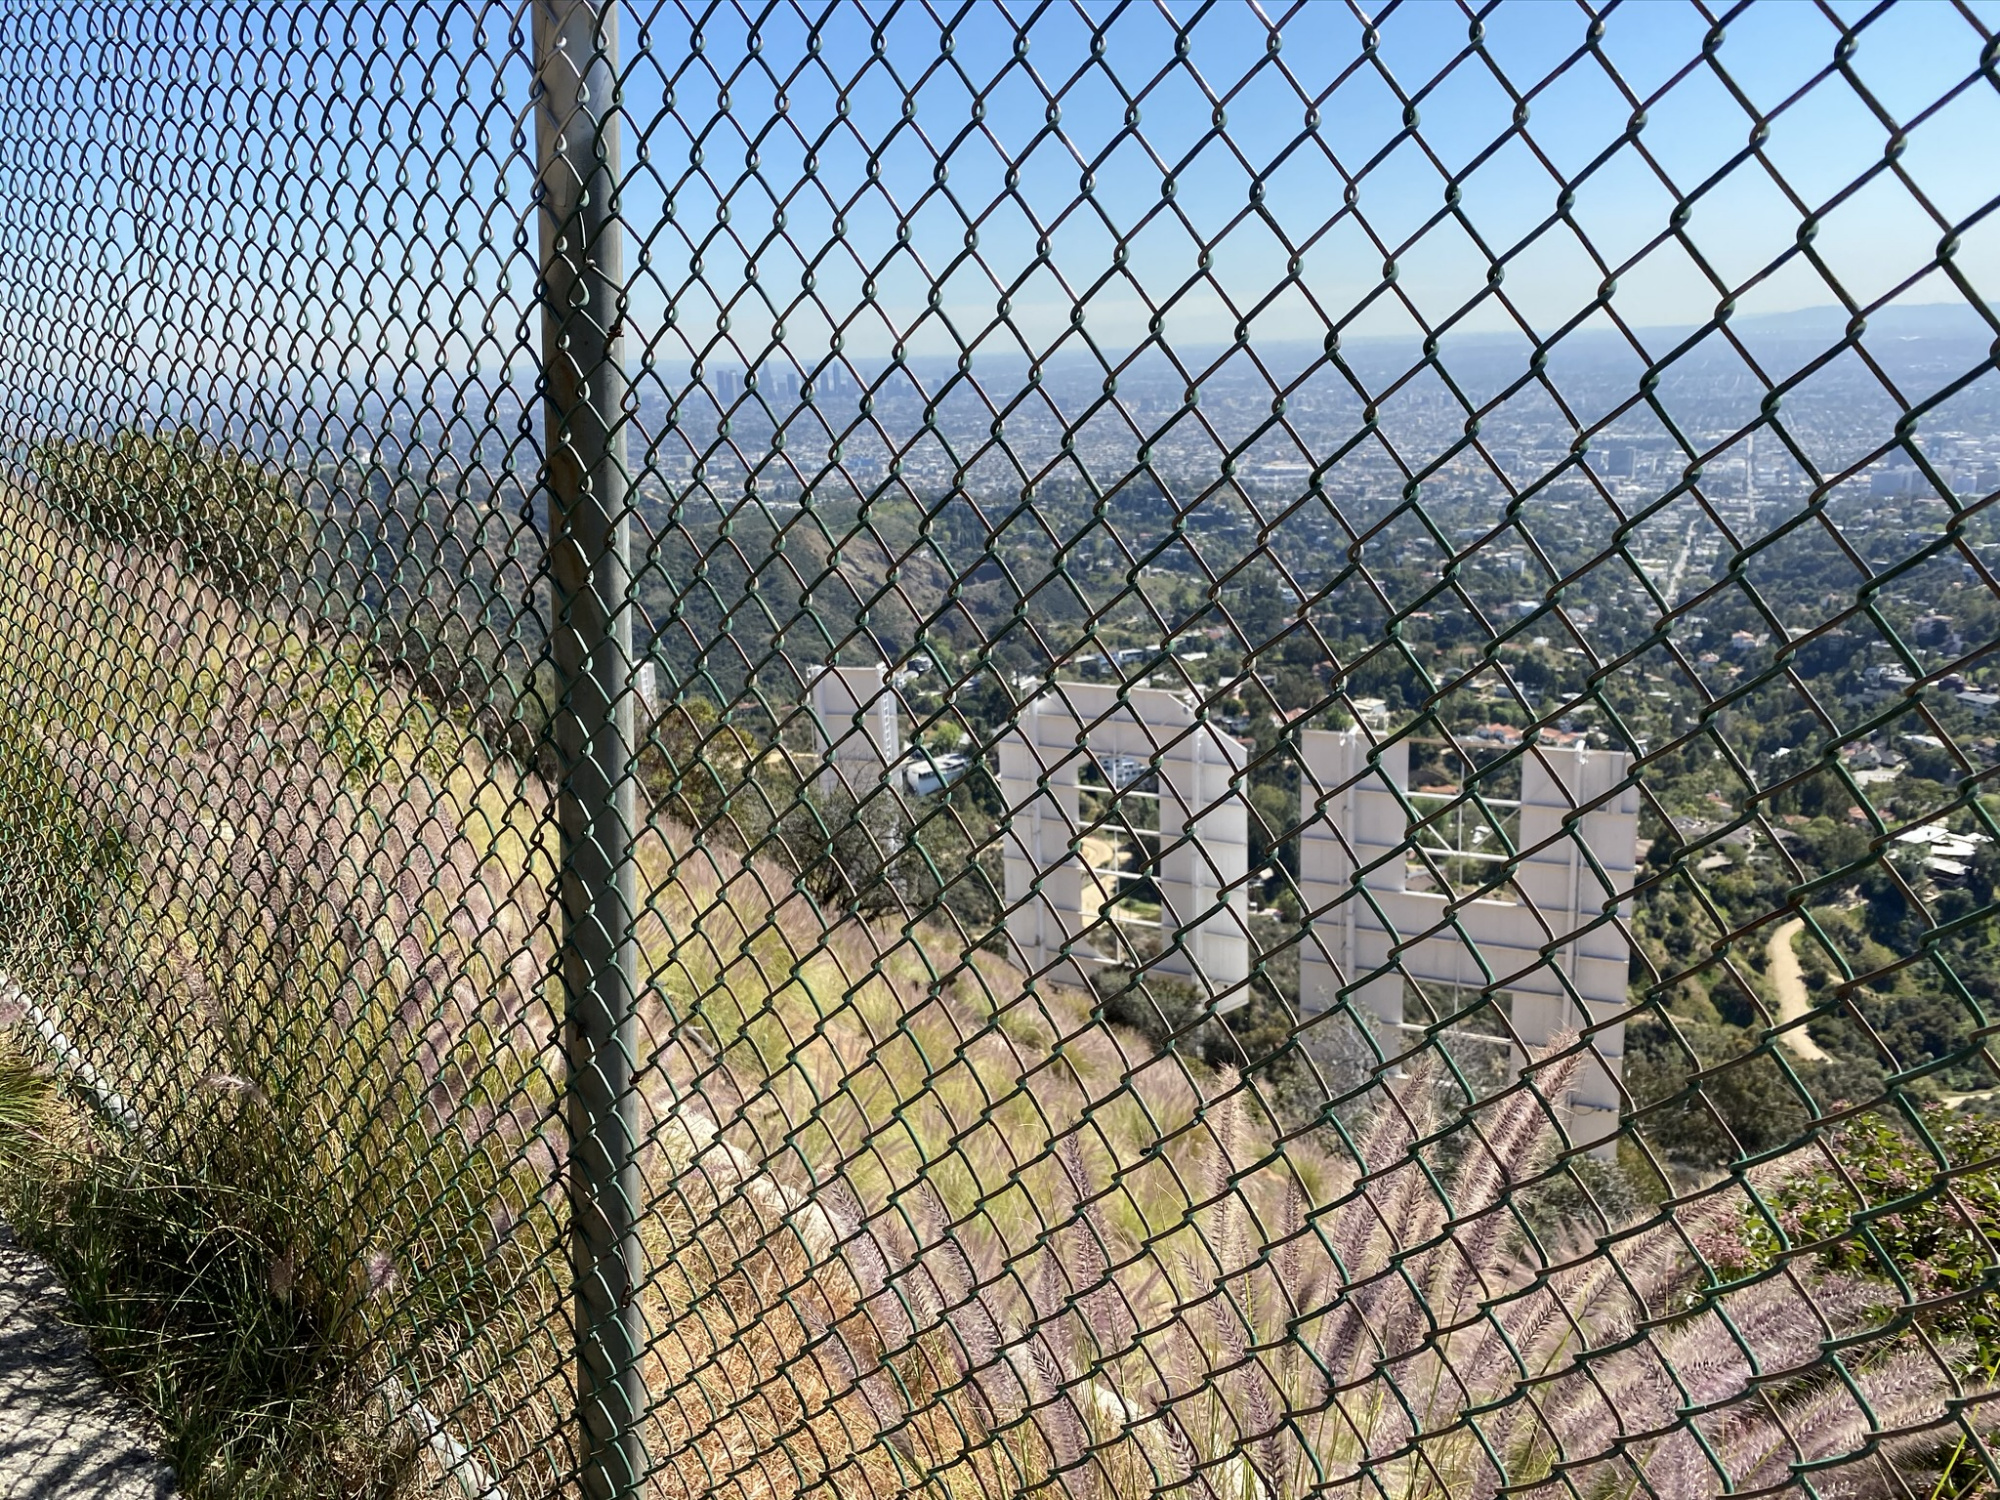 The view from above the Hollywood Sign